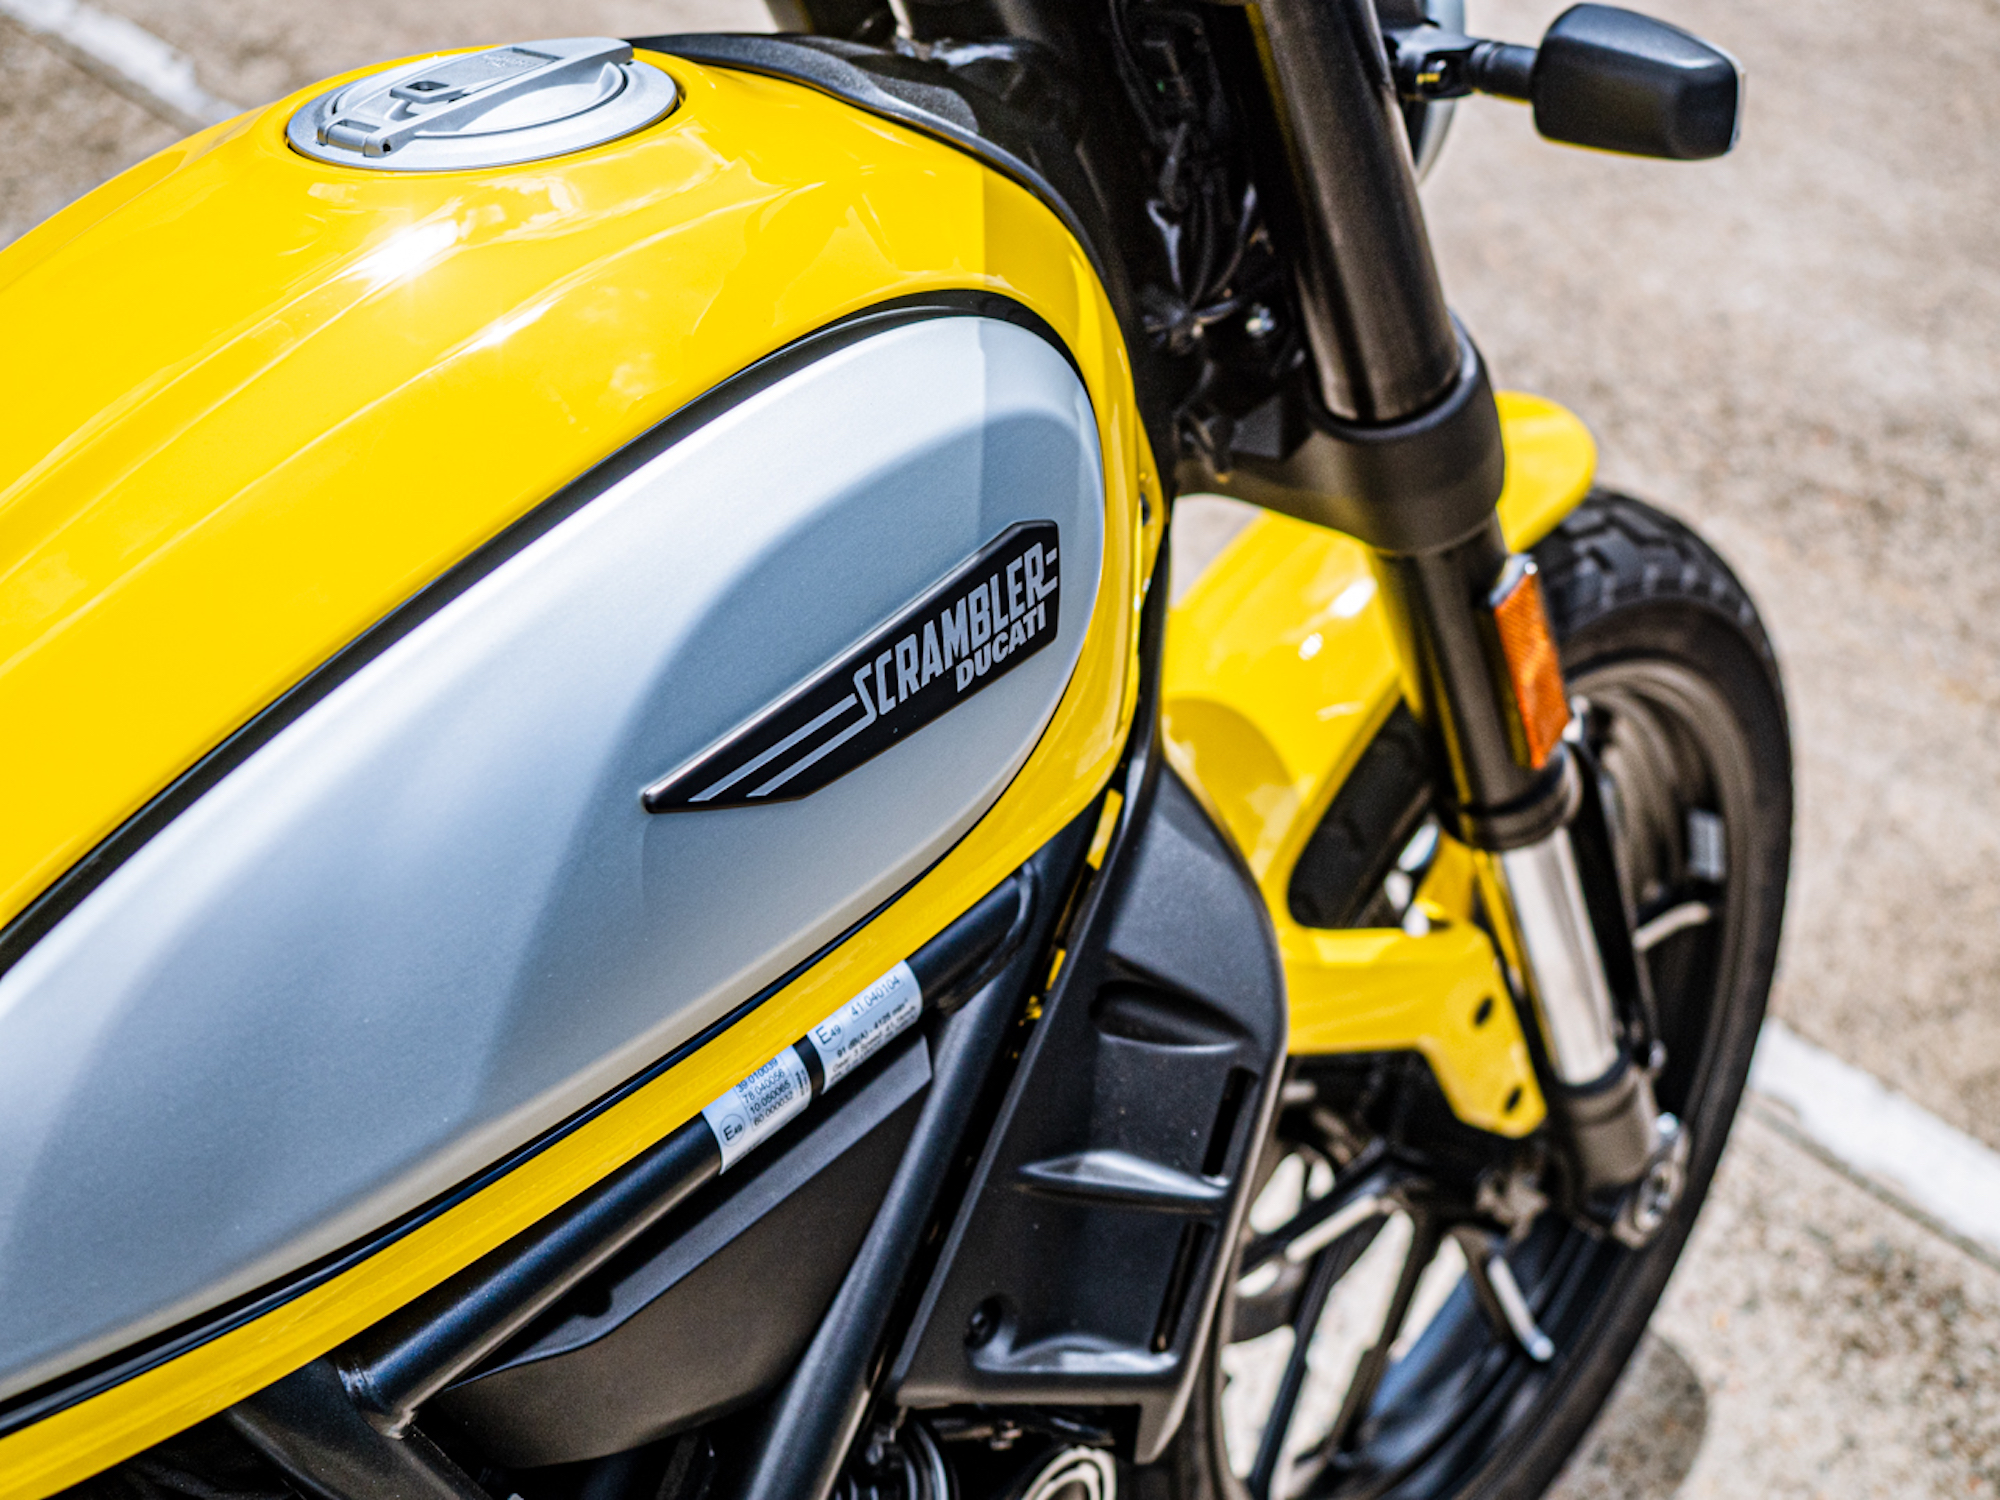 Ducati's 2022 Scrambler. Media sourced from Motorcycles R Us.